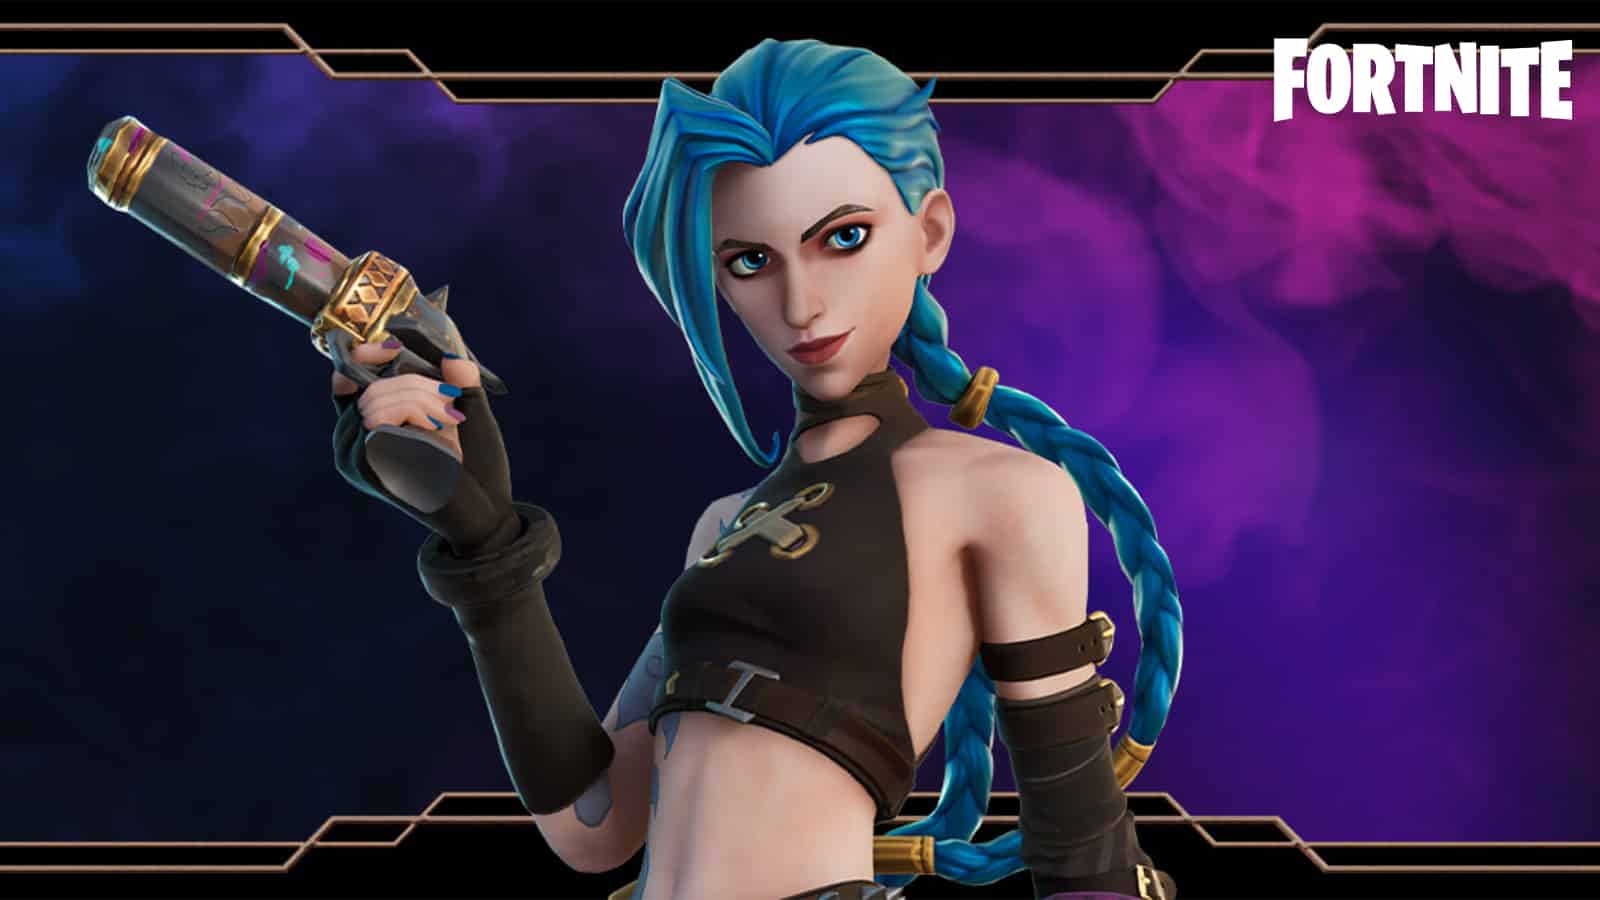 How to get Fortnite's League of Legends Jinx skin: Release date